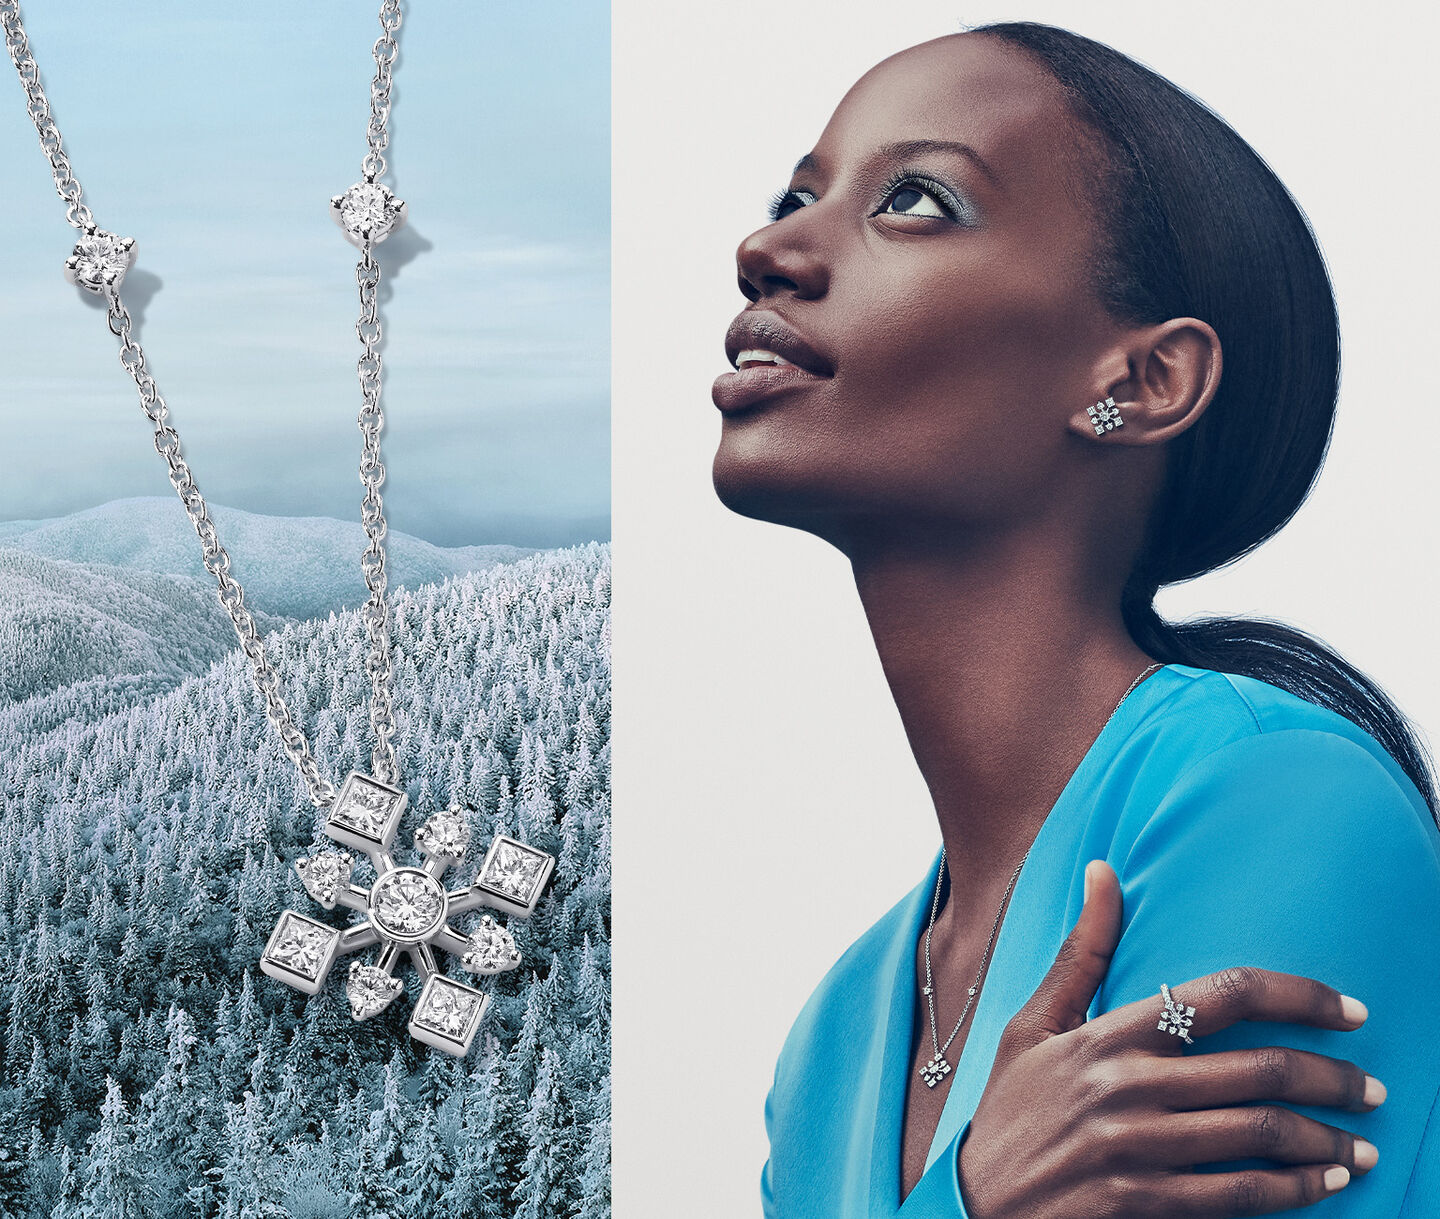 On the Right a model looks to the sky, on the left a white gold and diamond necklace